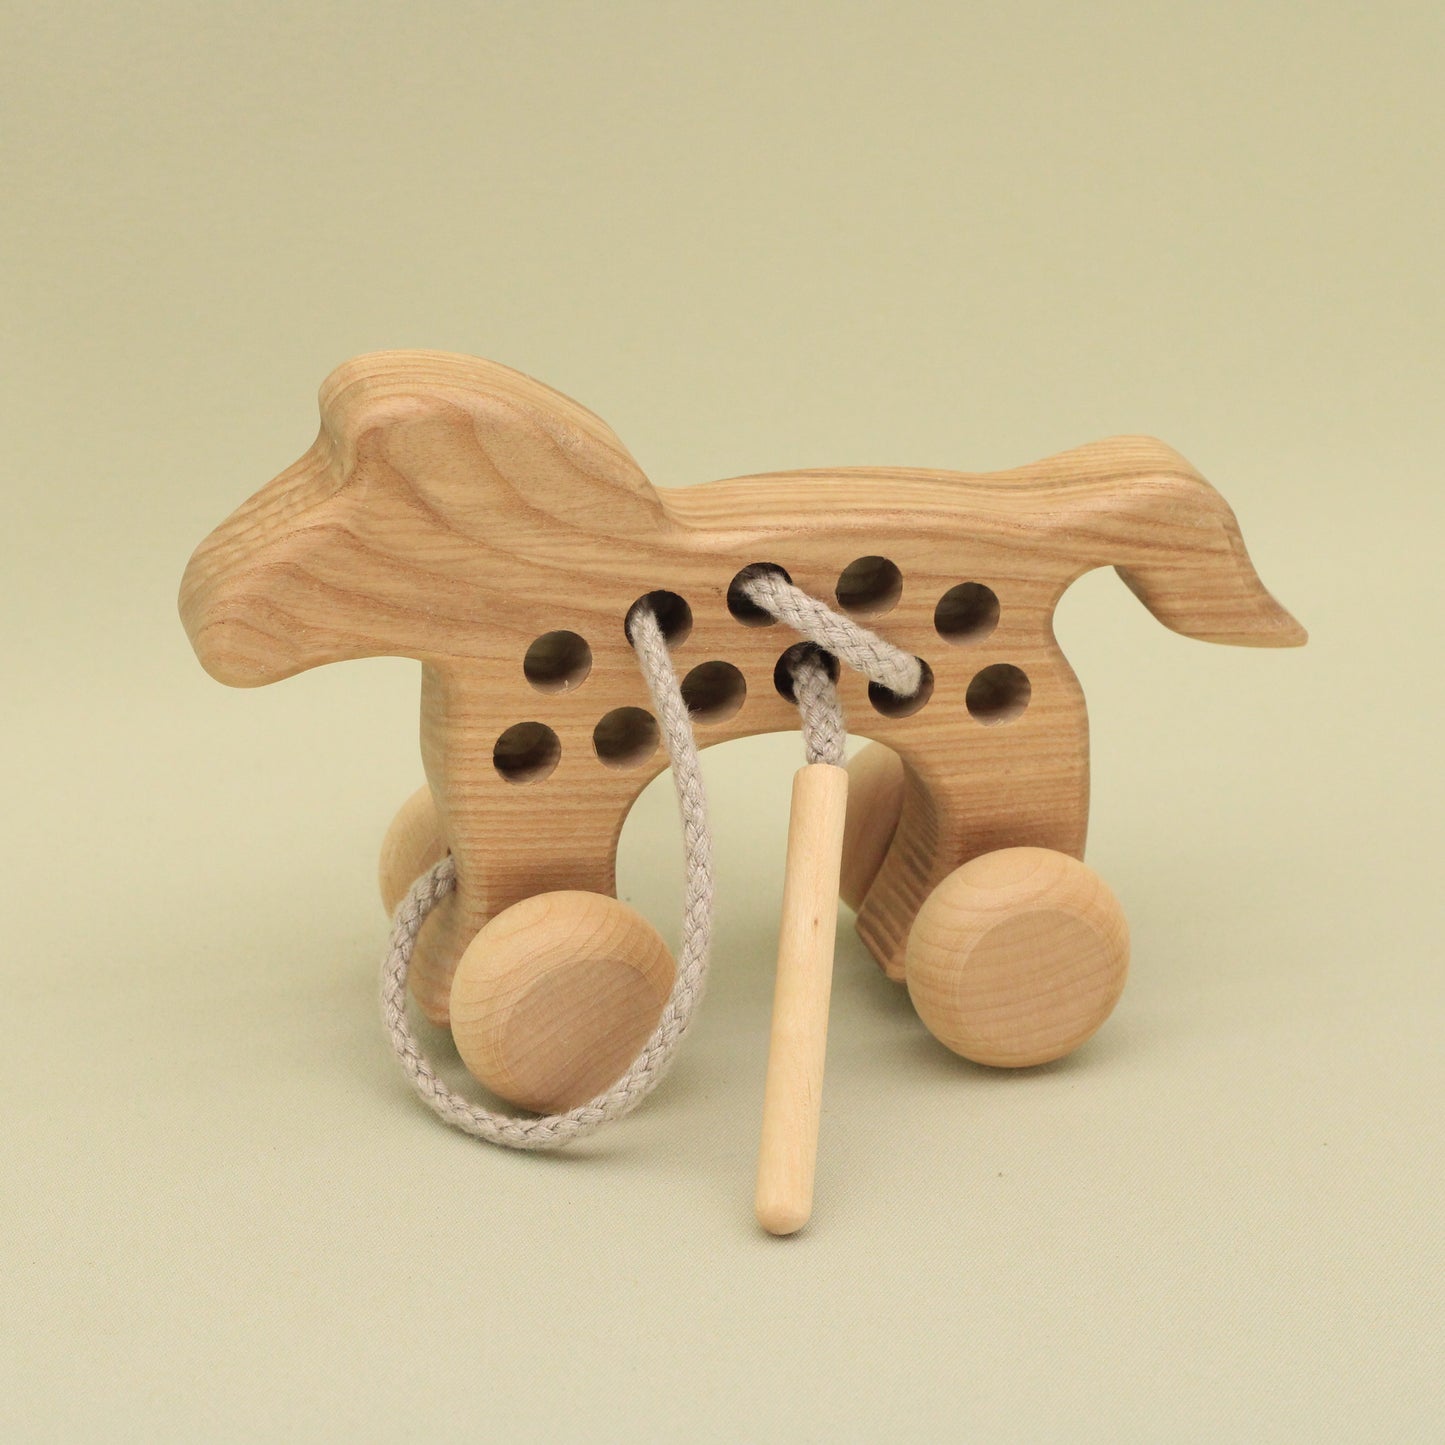 Lotes Toys Natural Wooden Threading Lacing Horse TT54